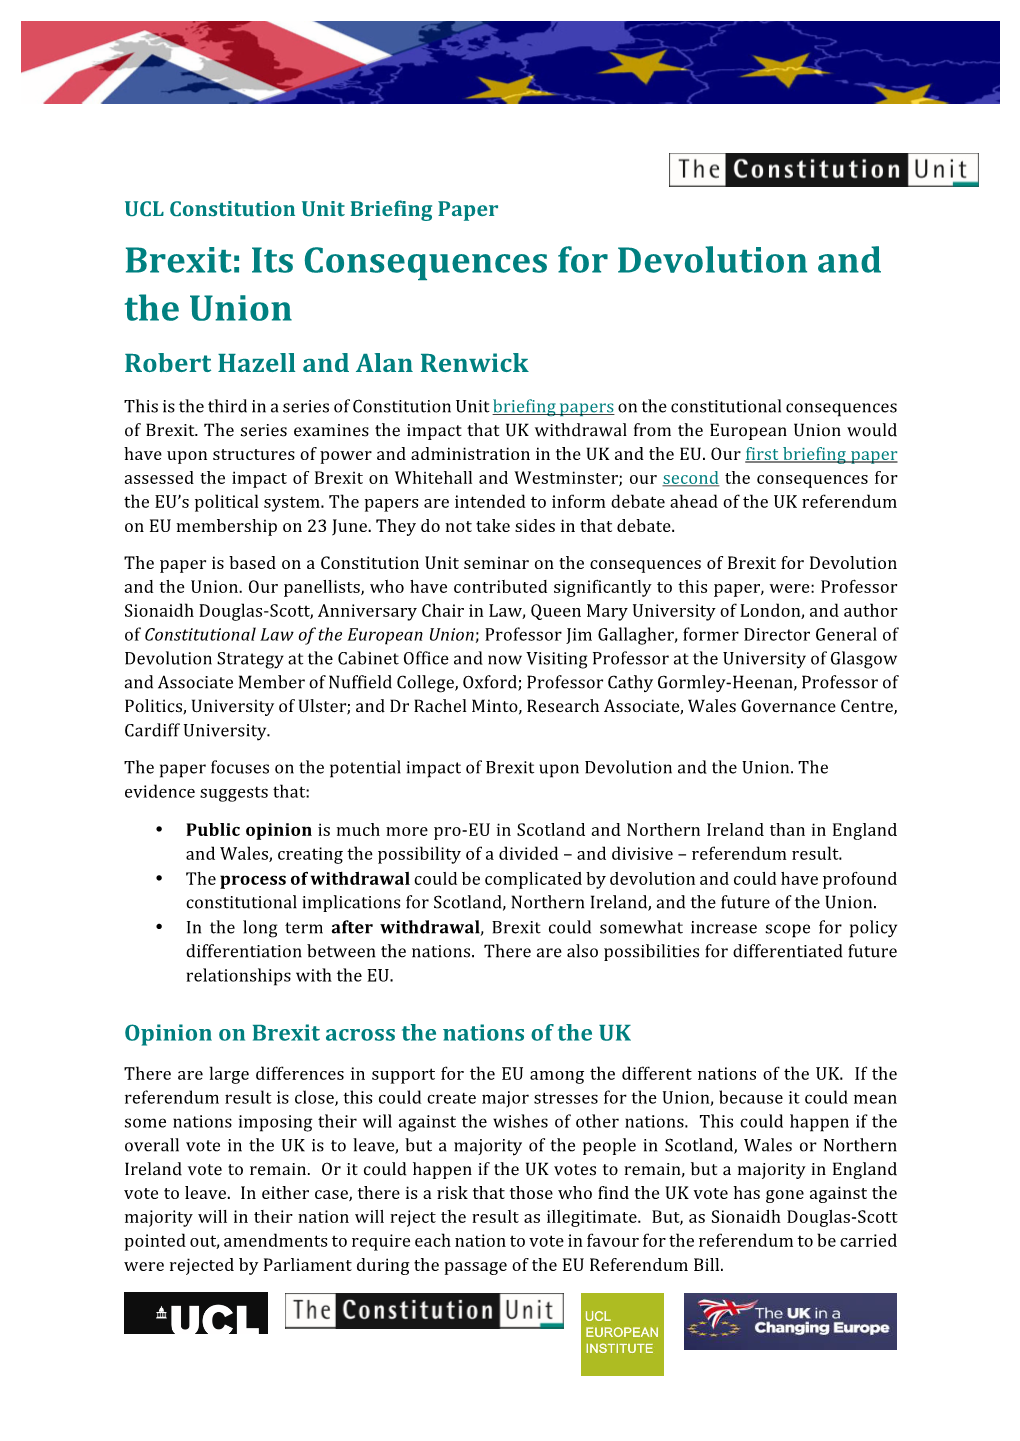 Brexit: Its Consequences for Devolution and the Union Robert Hazell and Alan Renwick